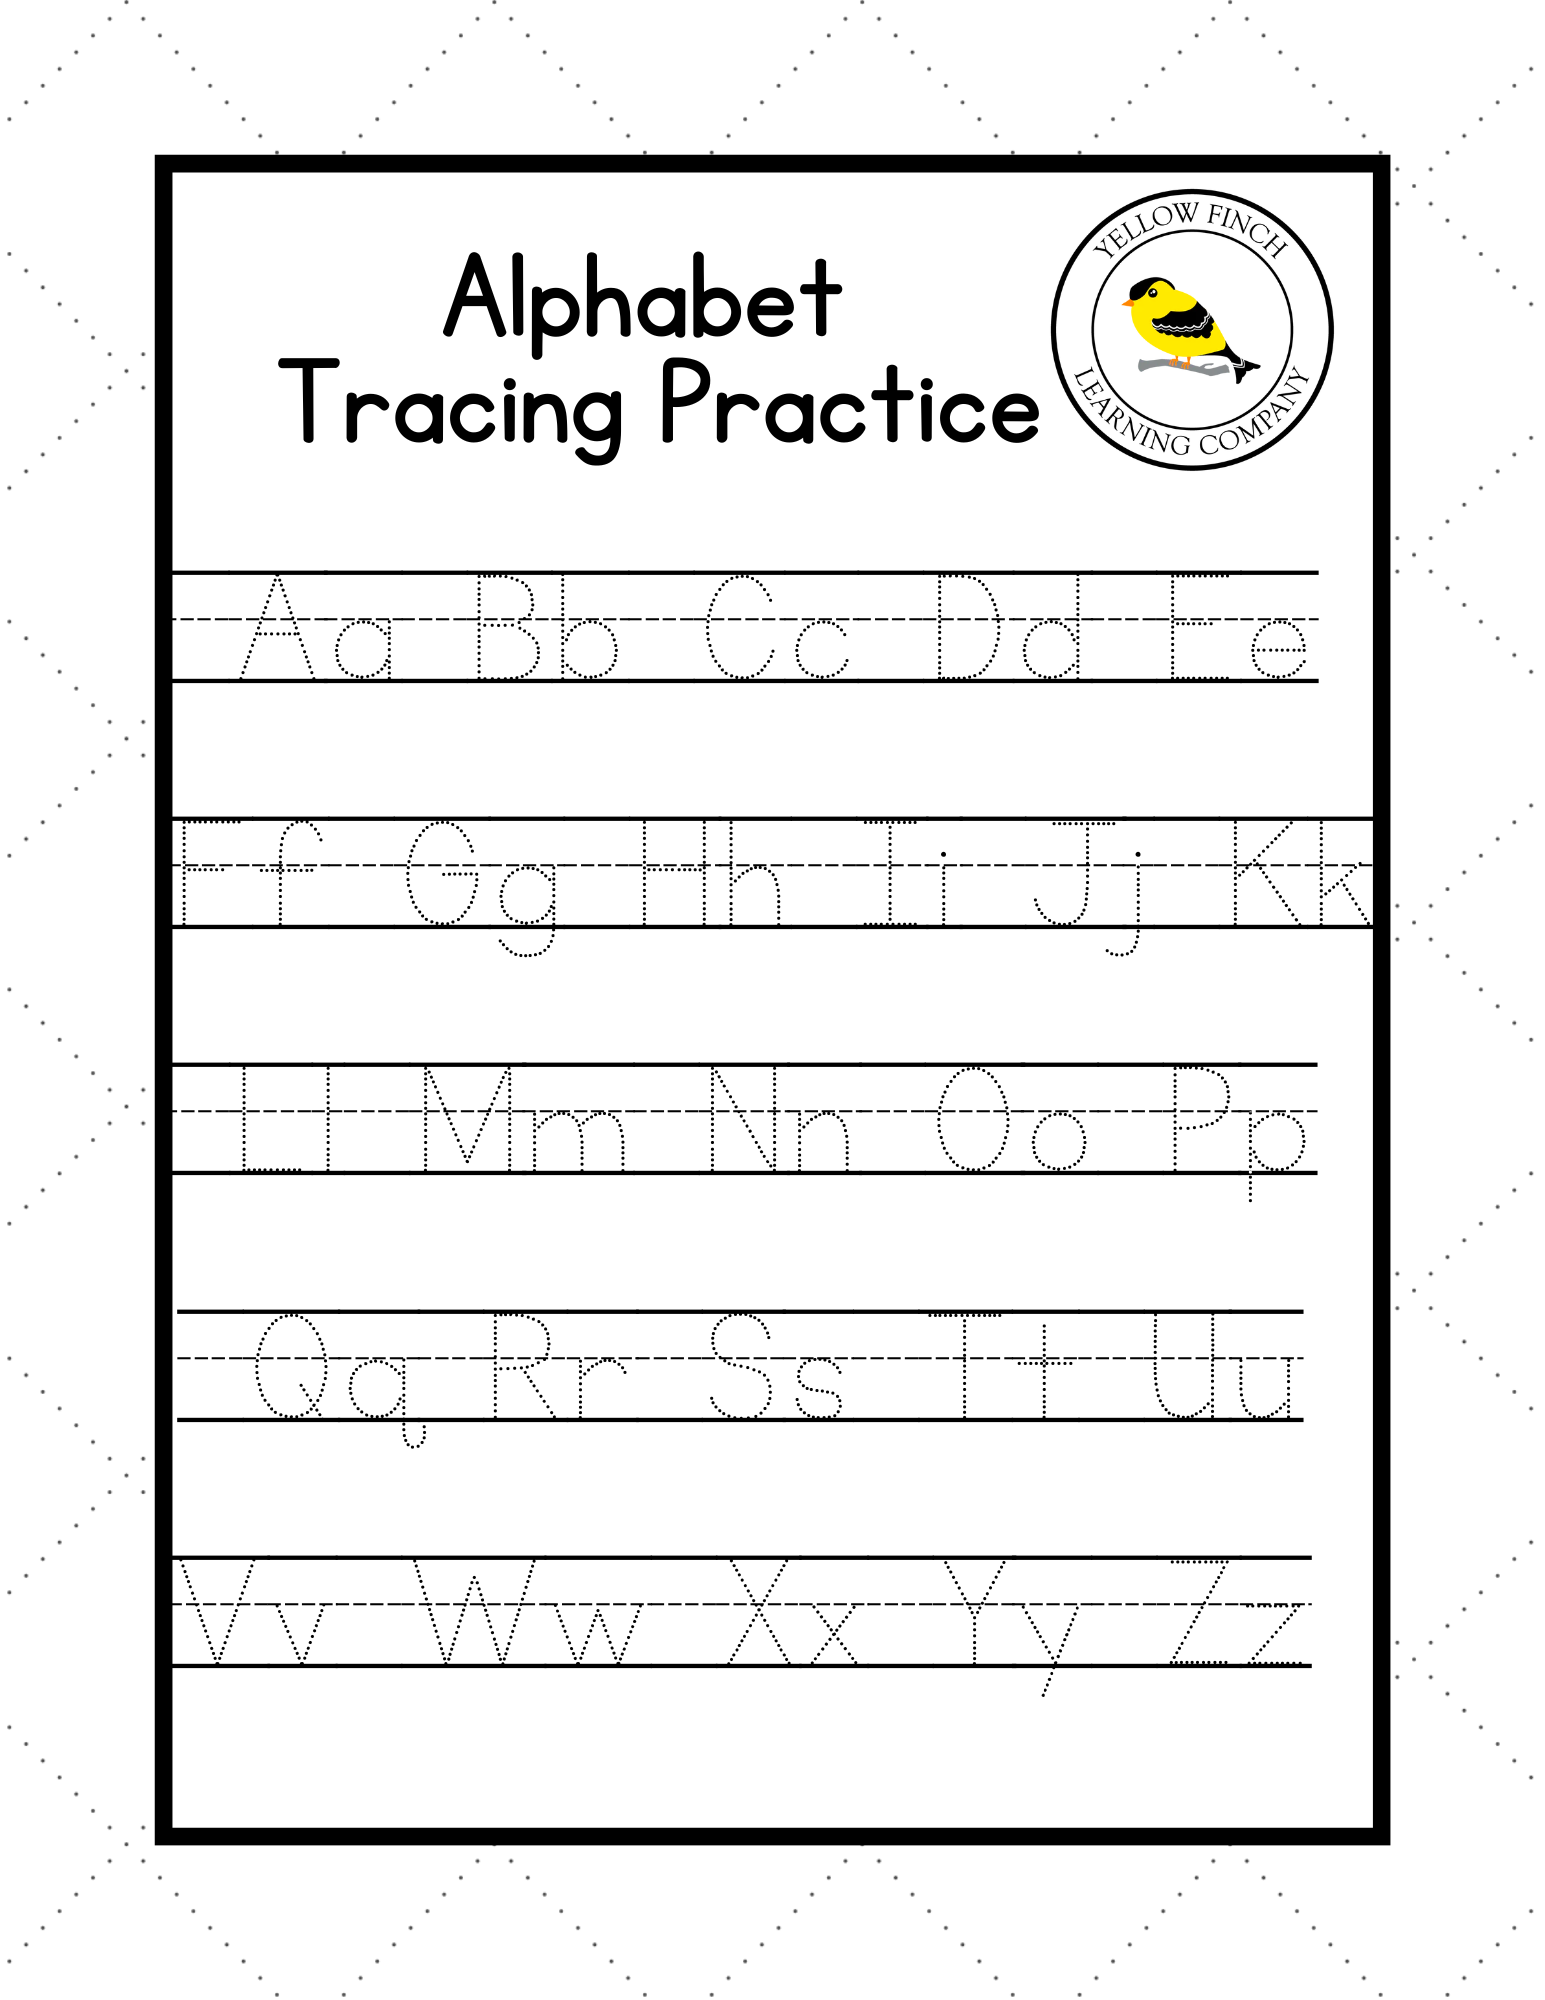 Alphabet Tracing - FREE DOWNLOAD